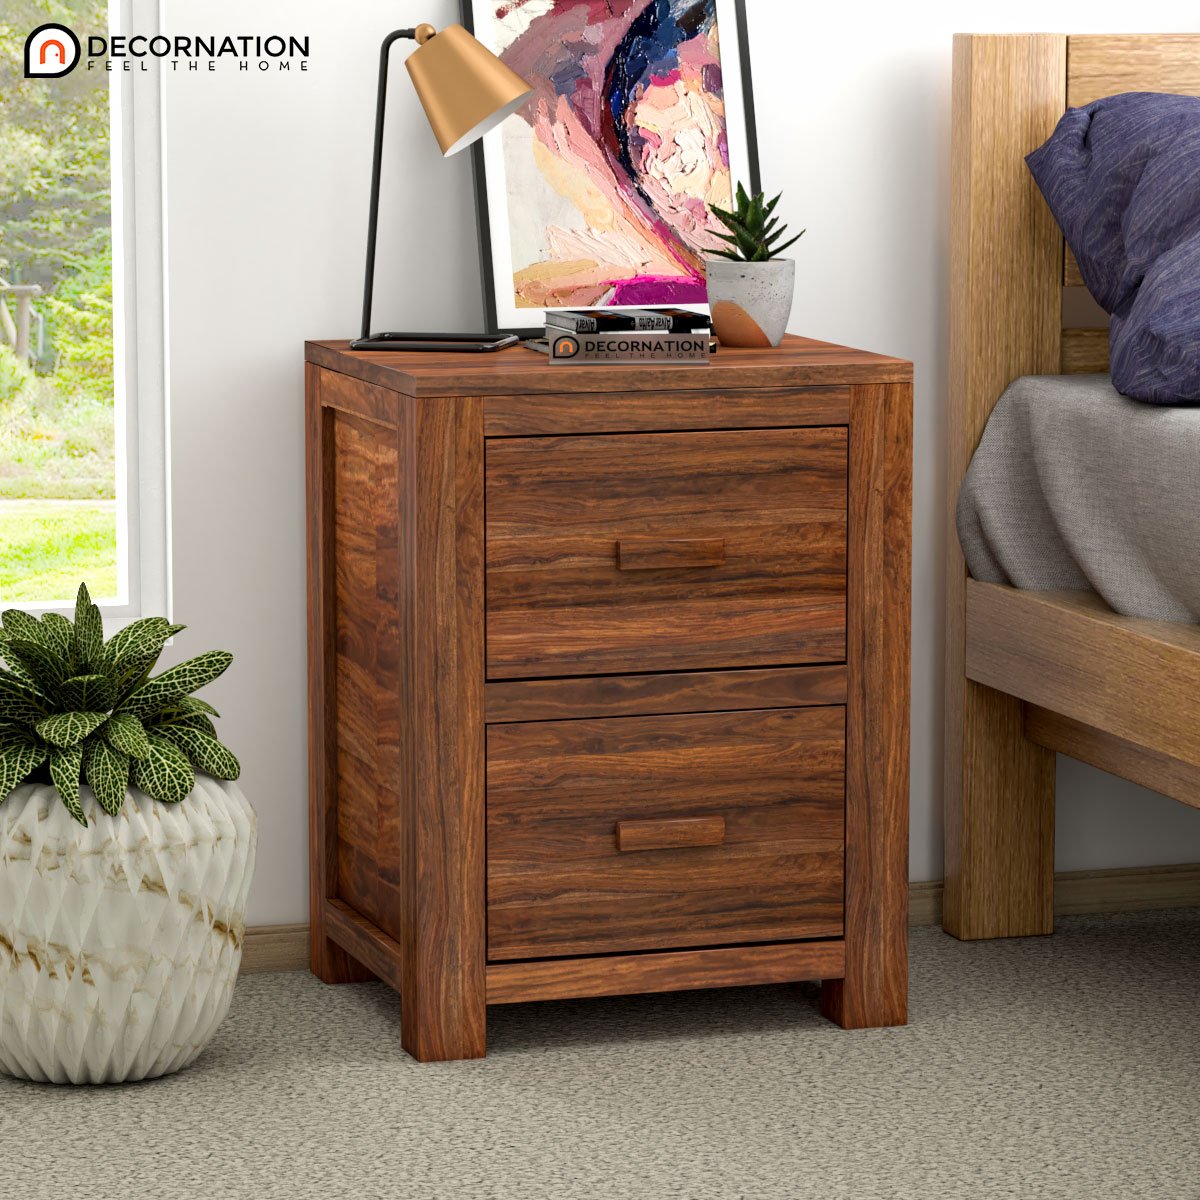 Kyros Wooden Bedside Table With Storage – Natural Finish